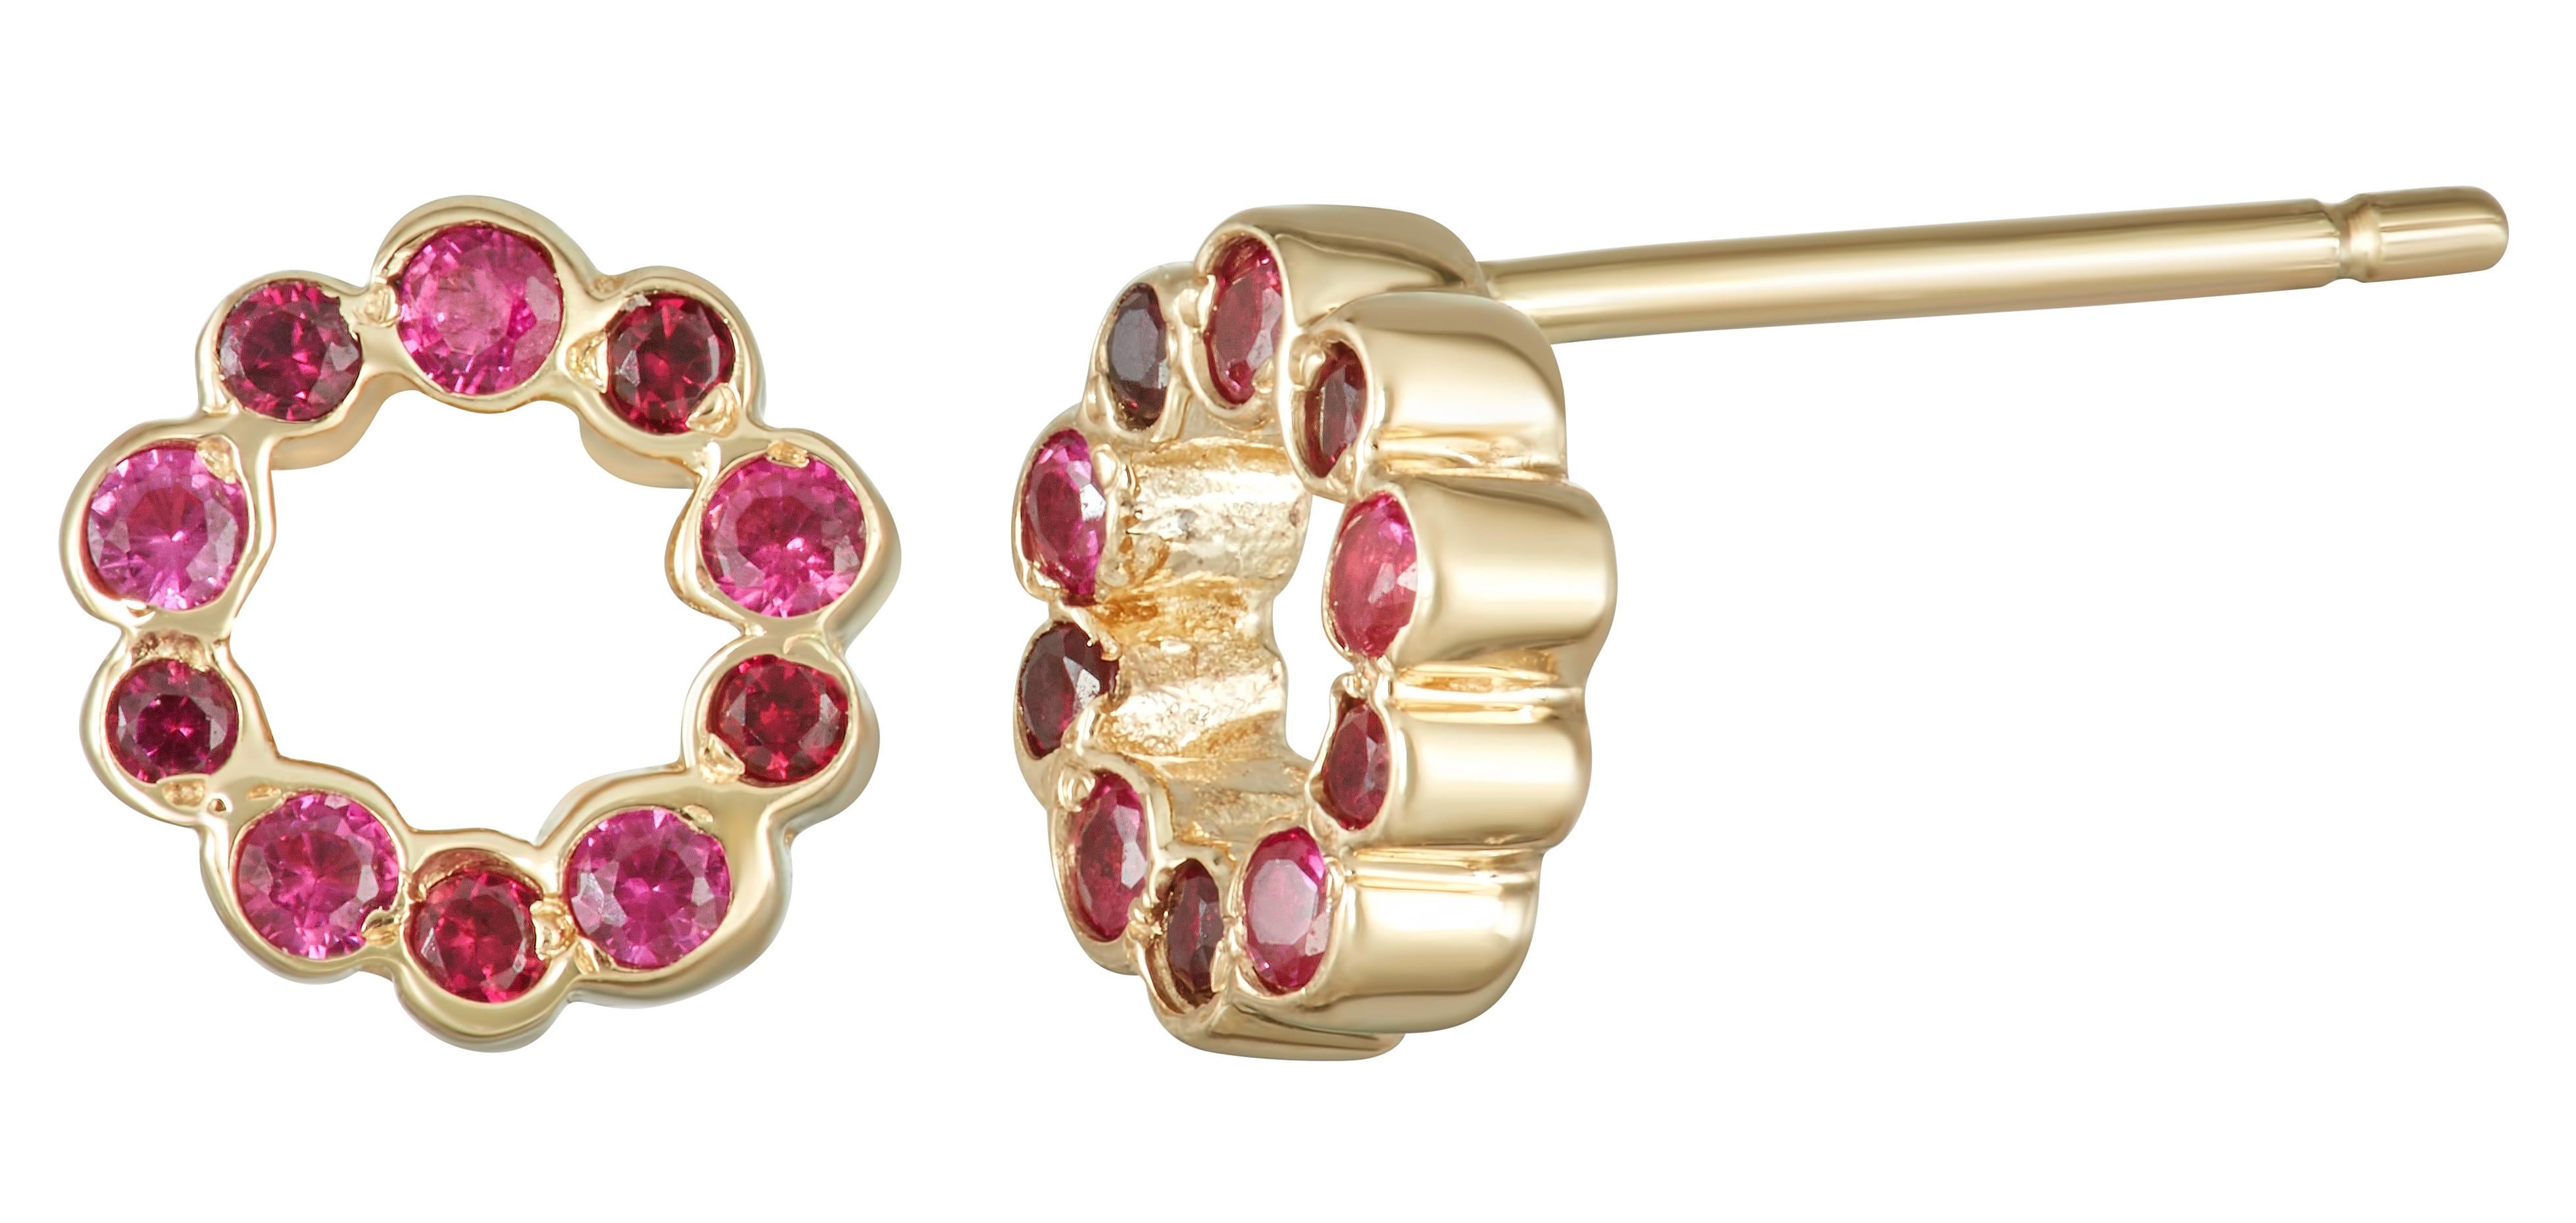 Contemporary 14 Karat Yellow Gold with Rubies Stud Earrings